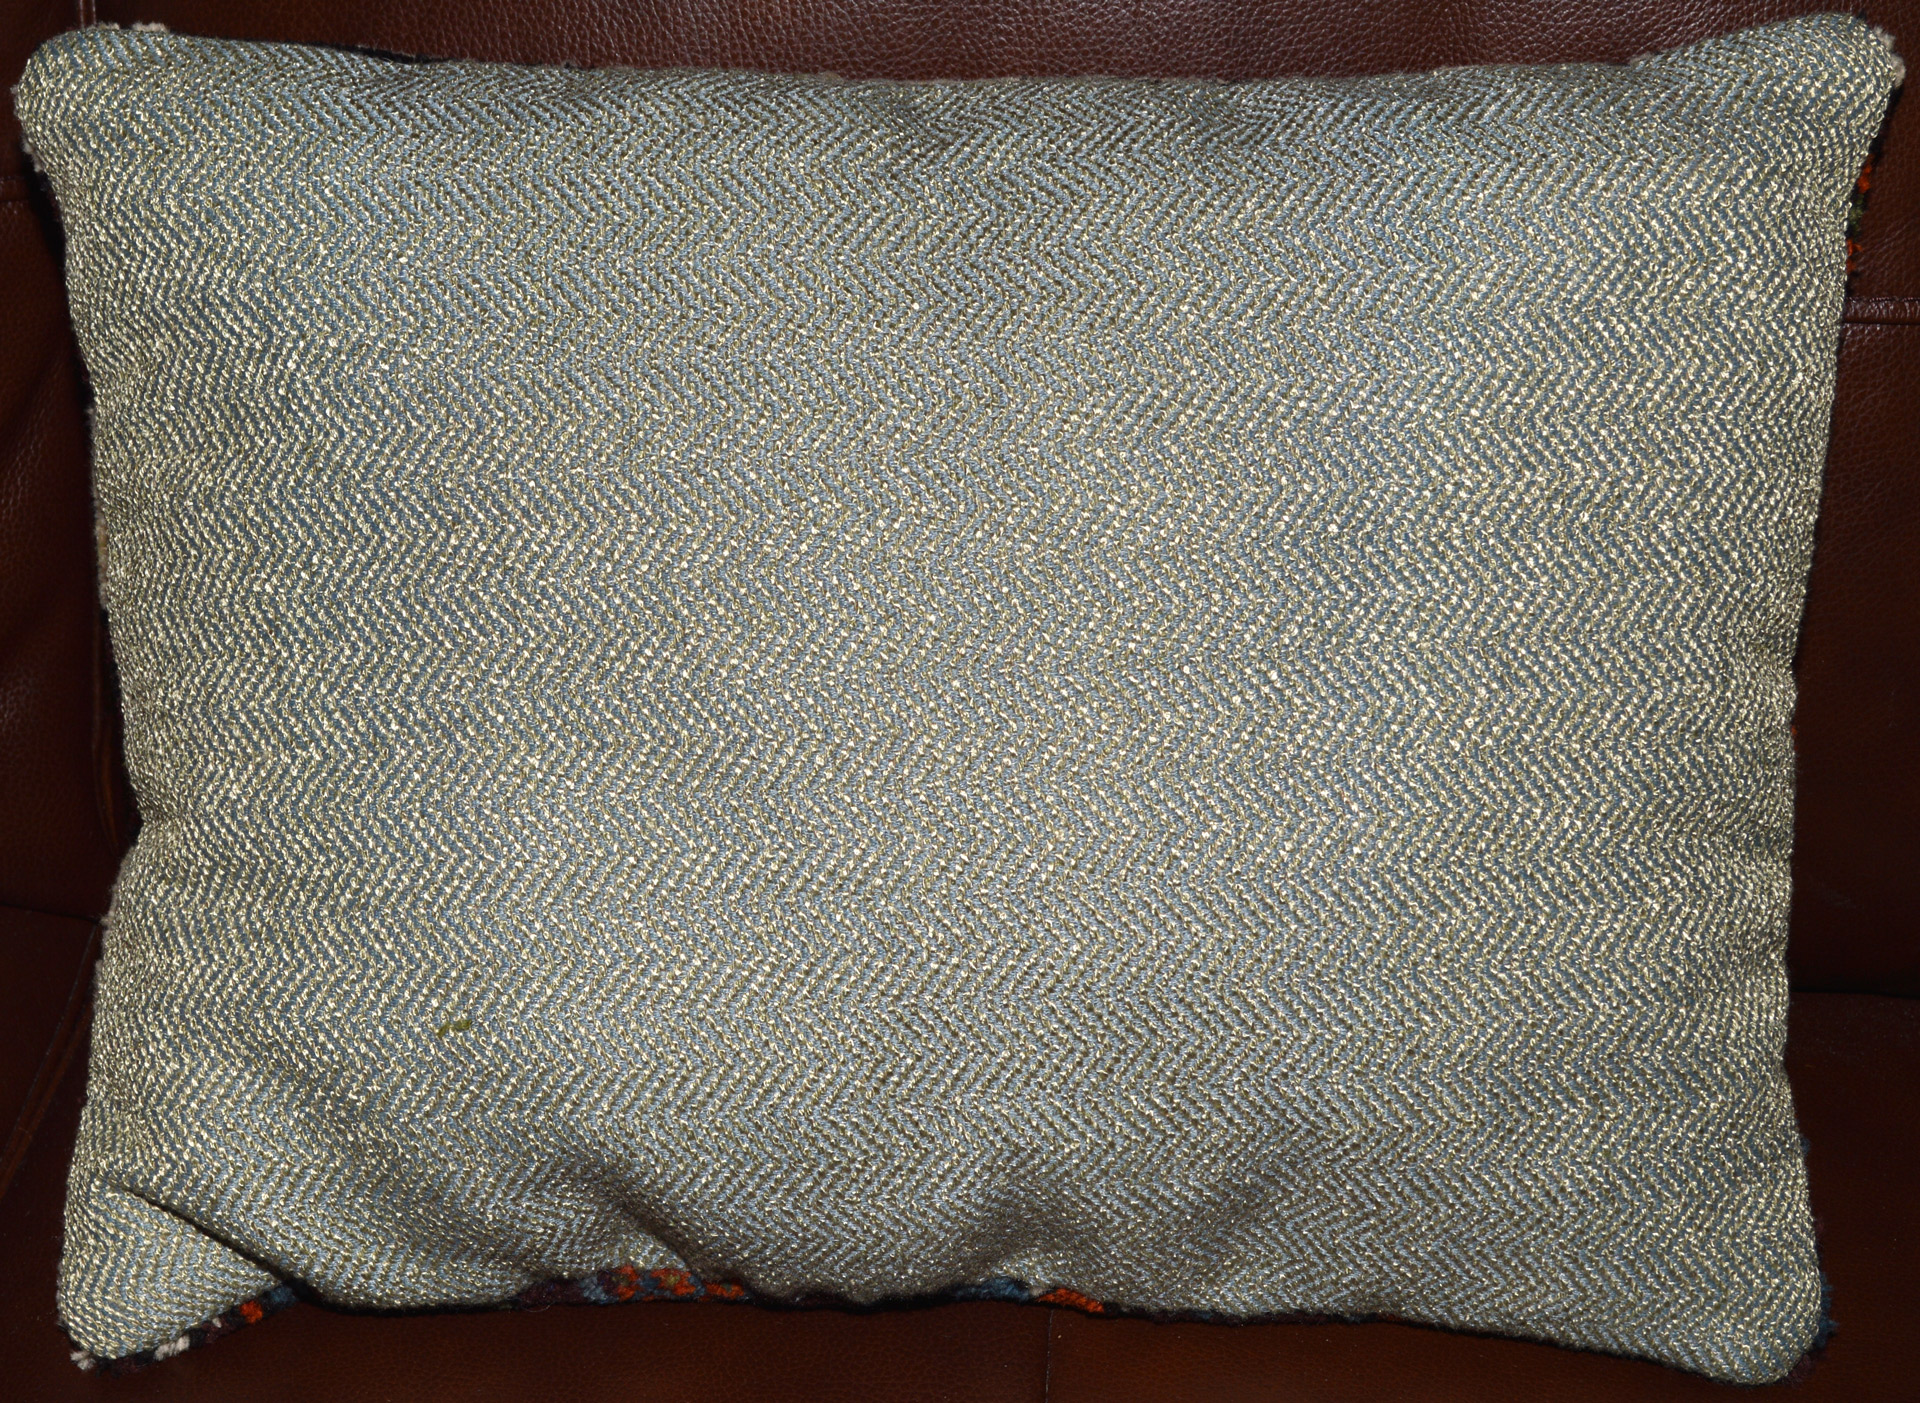 Greenish- Gray herringbone fabric used as backing on some of the Turkish rug pillows